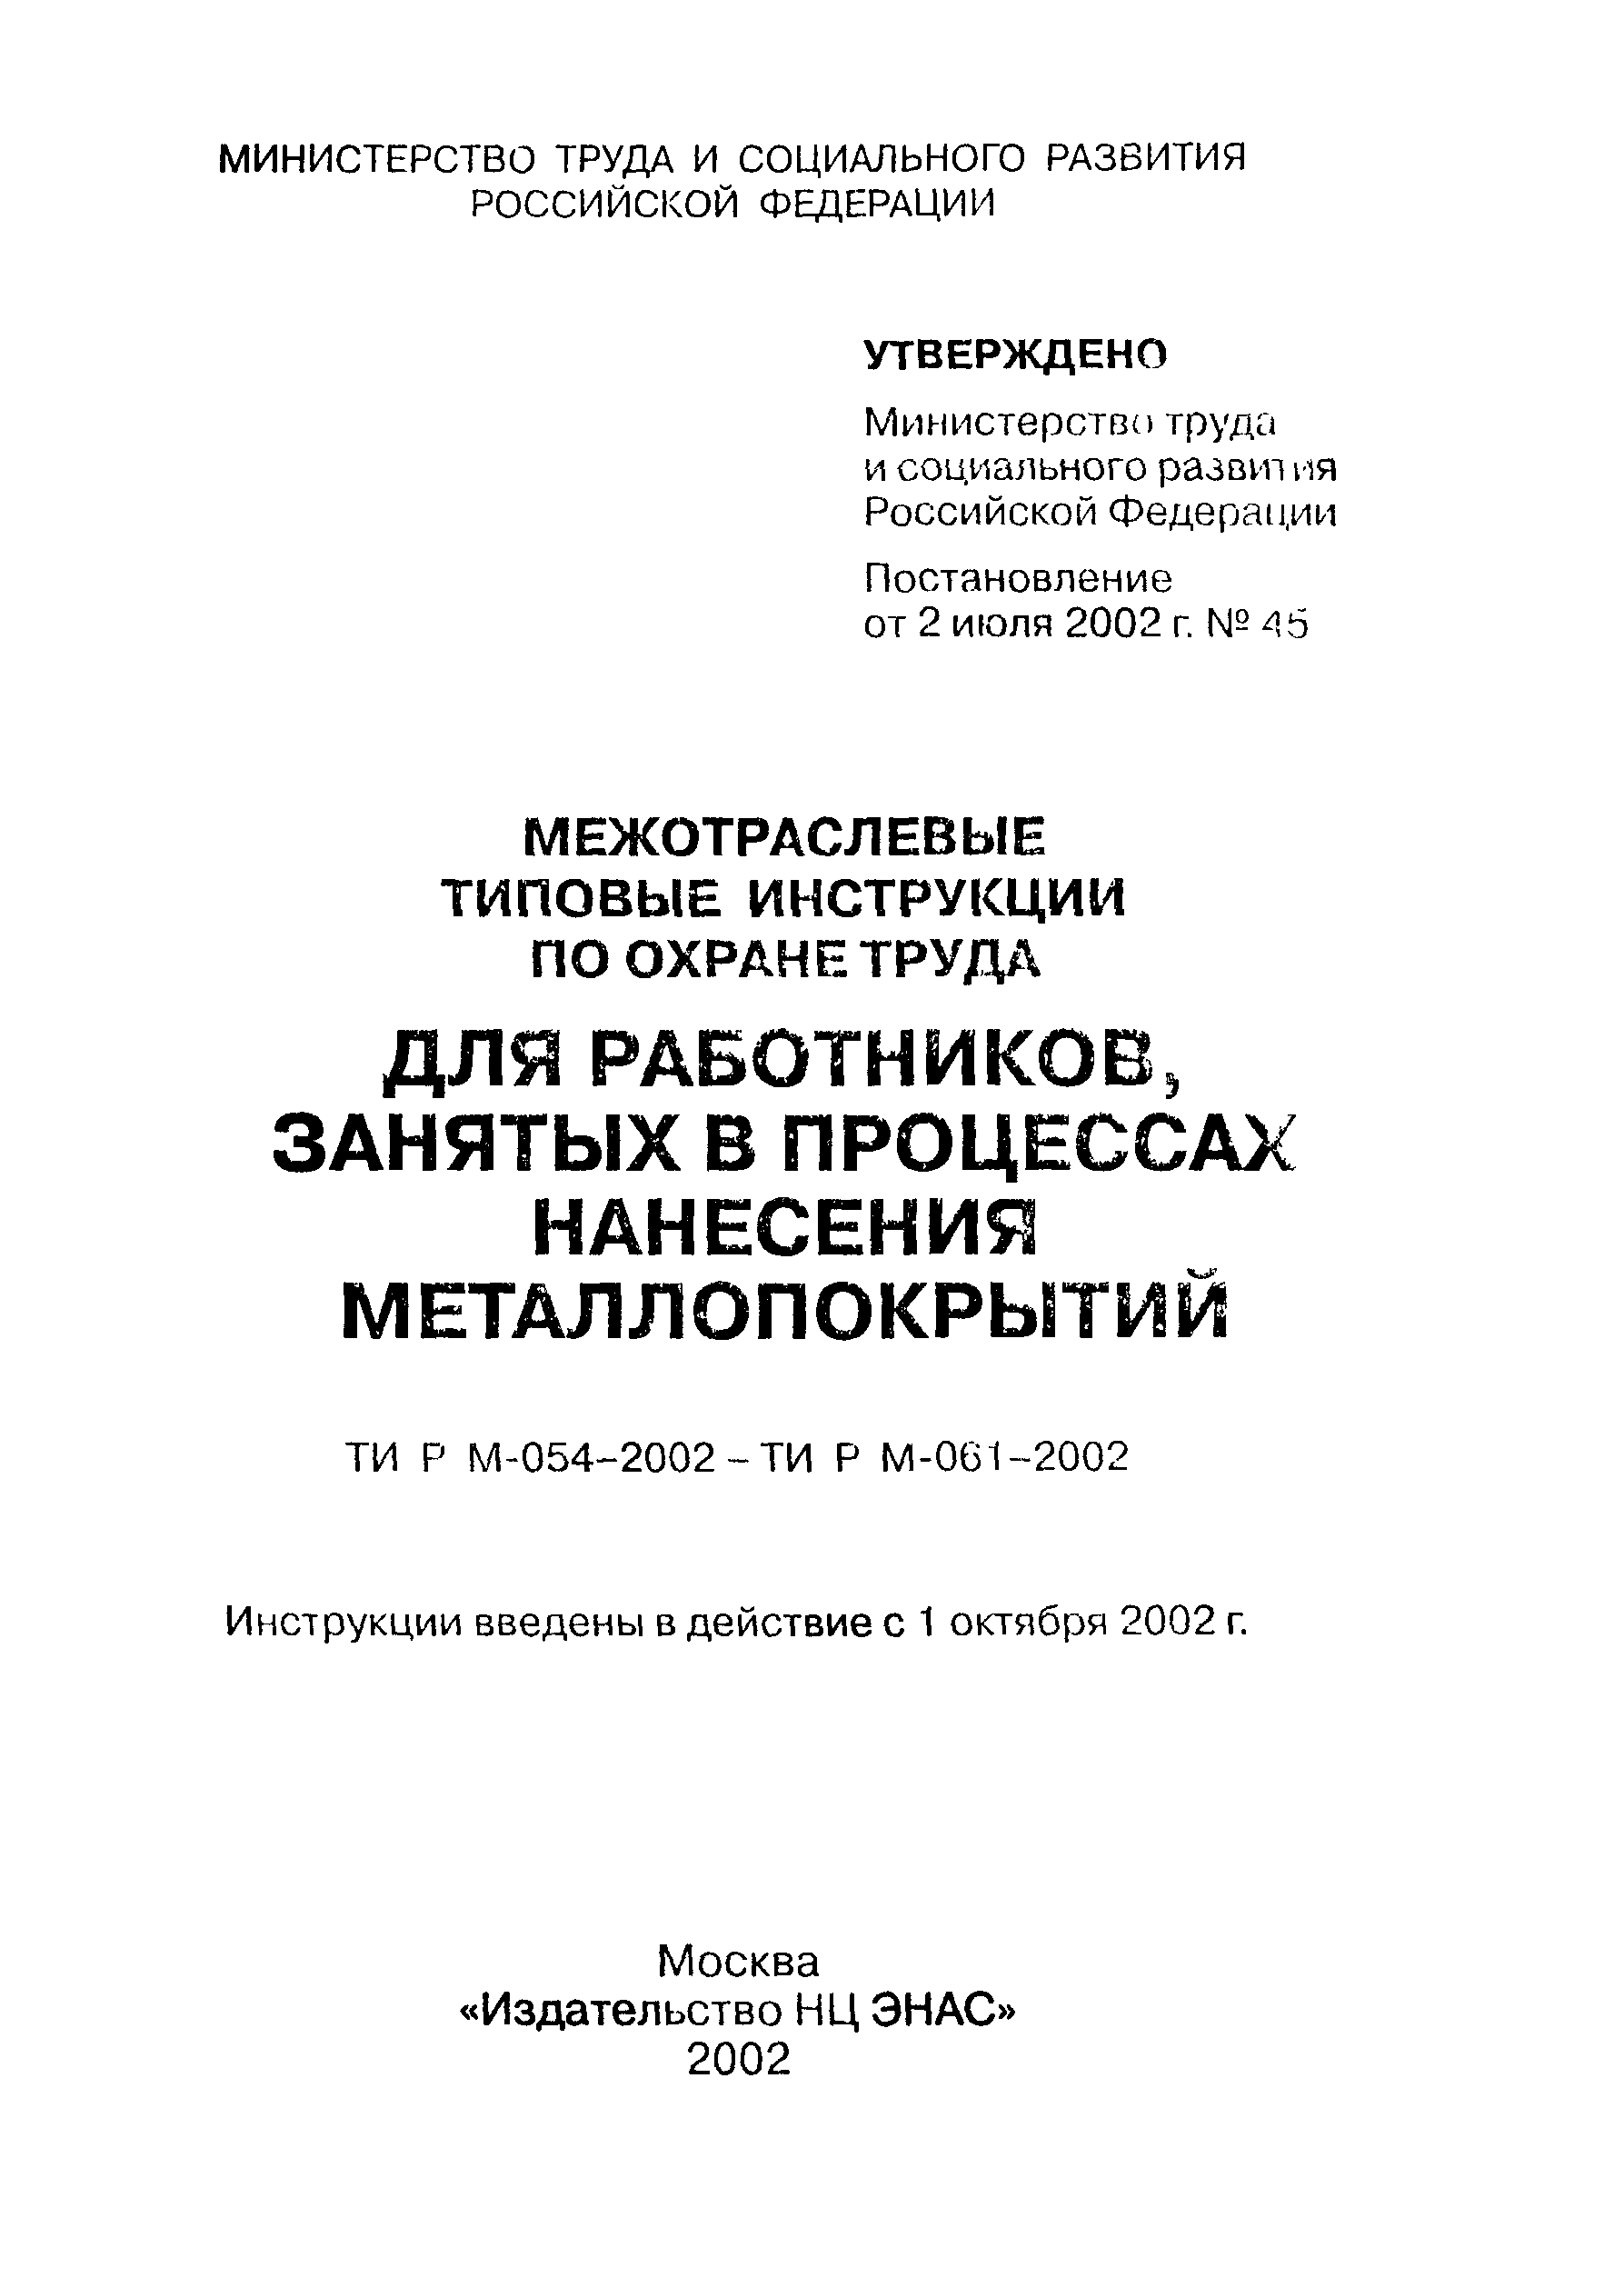 ТИ Р М-057-2002